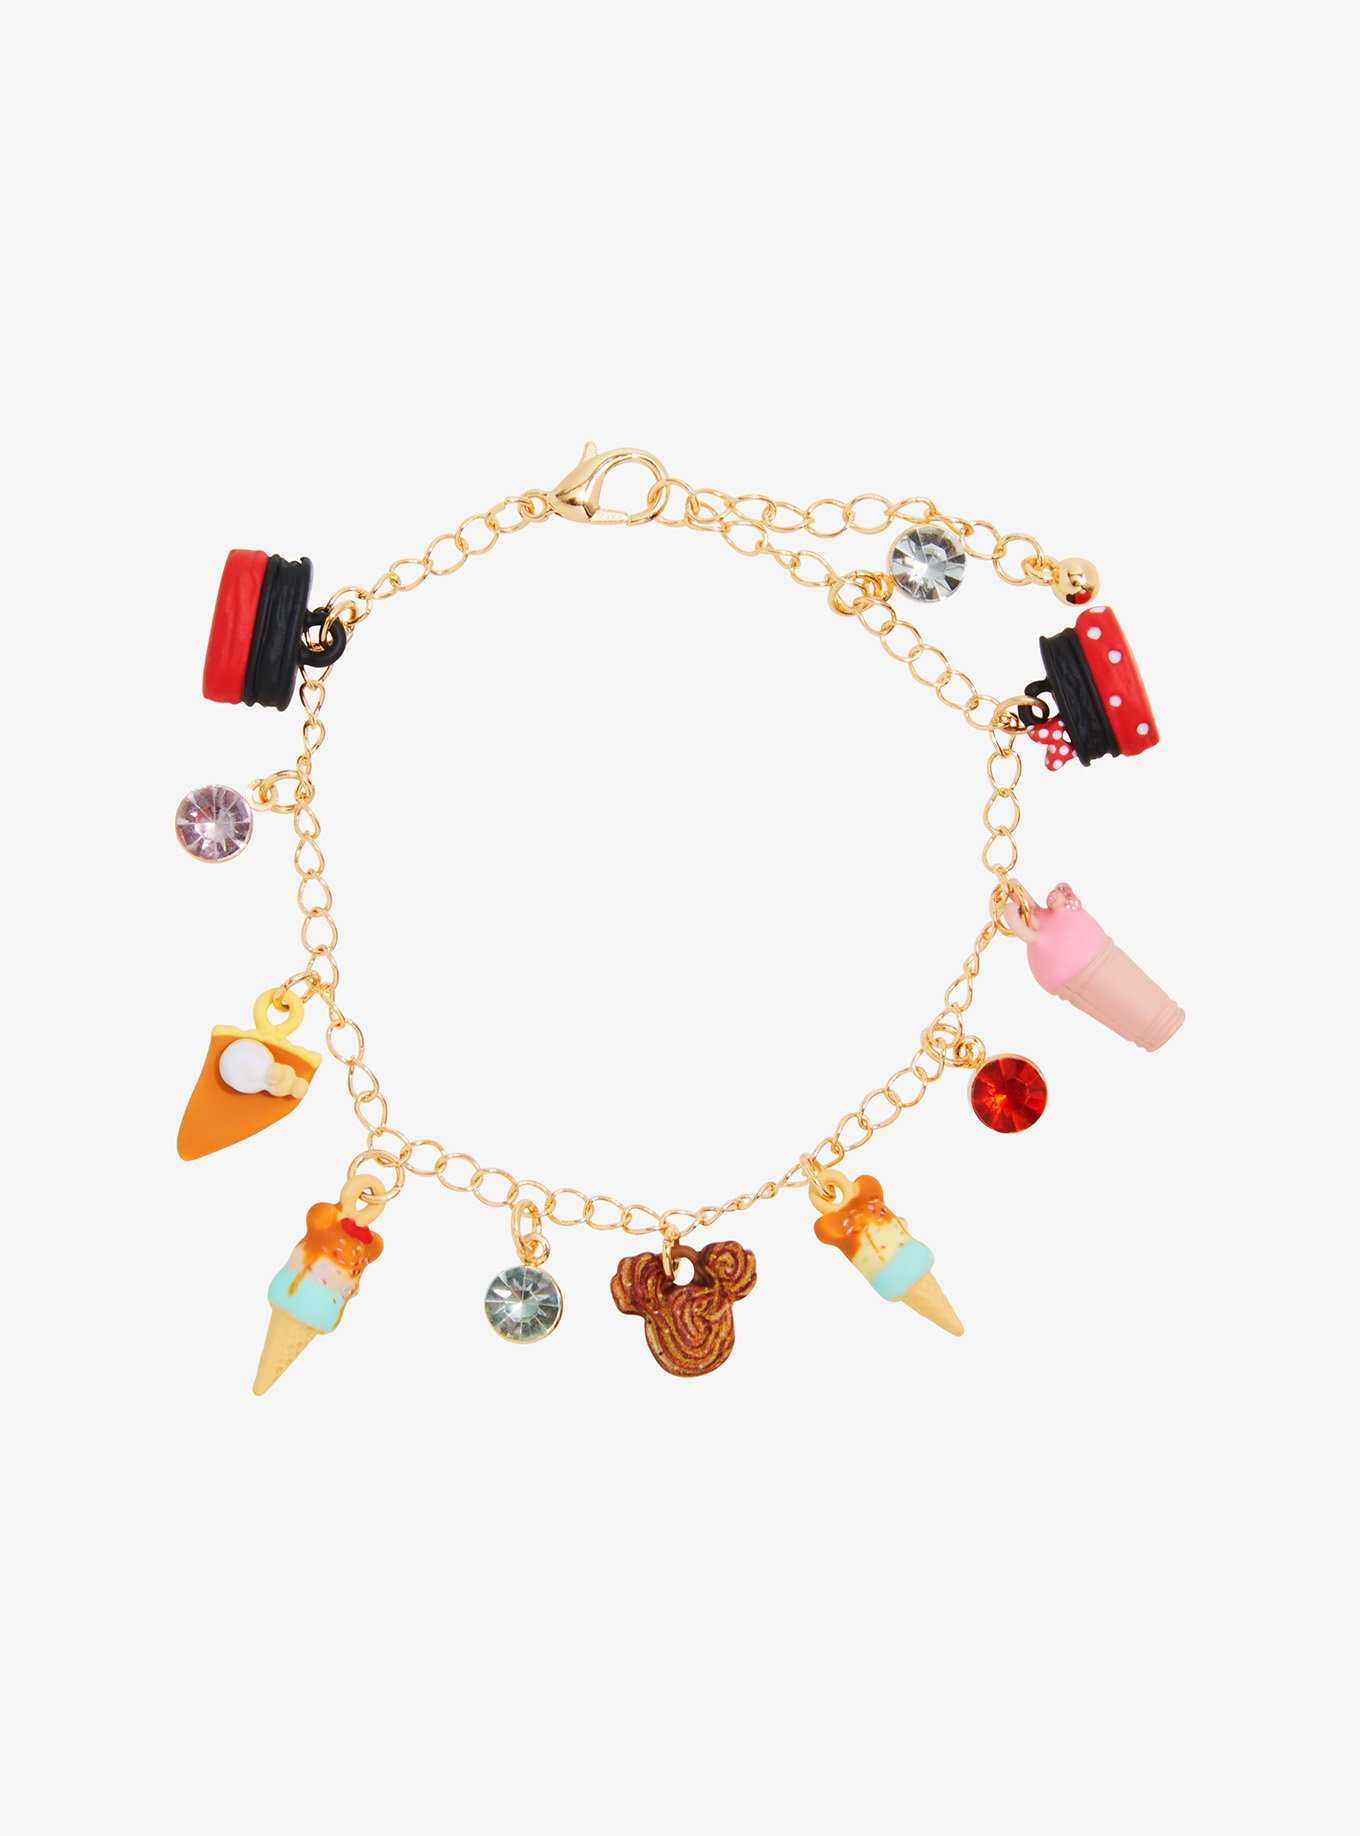 Disney Mickey & Minnie Mouse Desserts Charm Bracelet - BoxLunch Exclusive, , hi-res